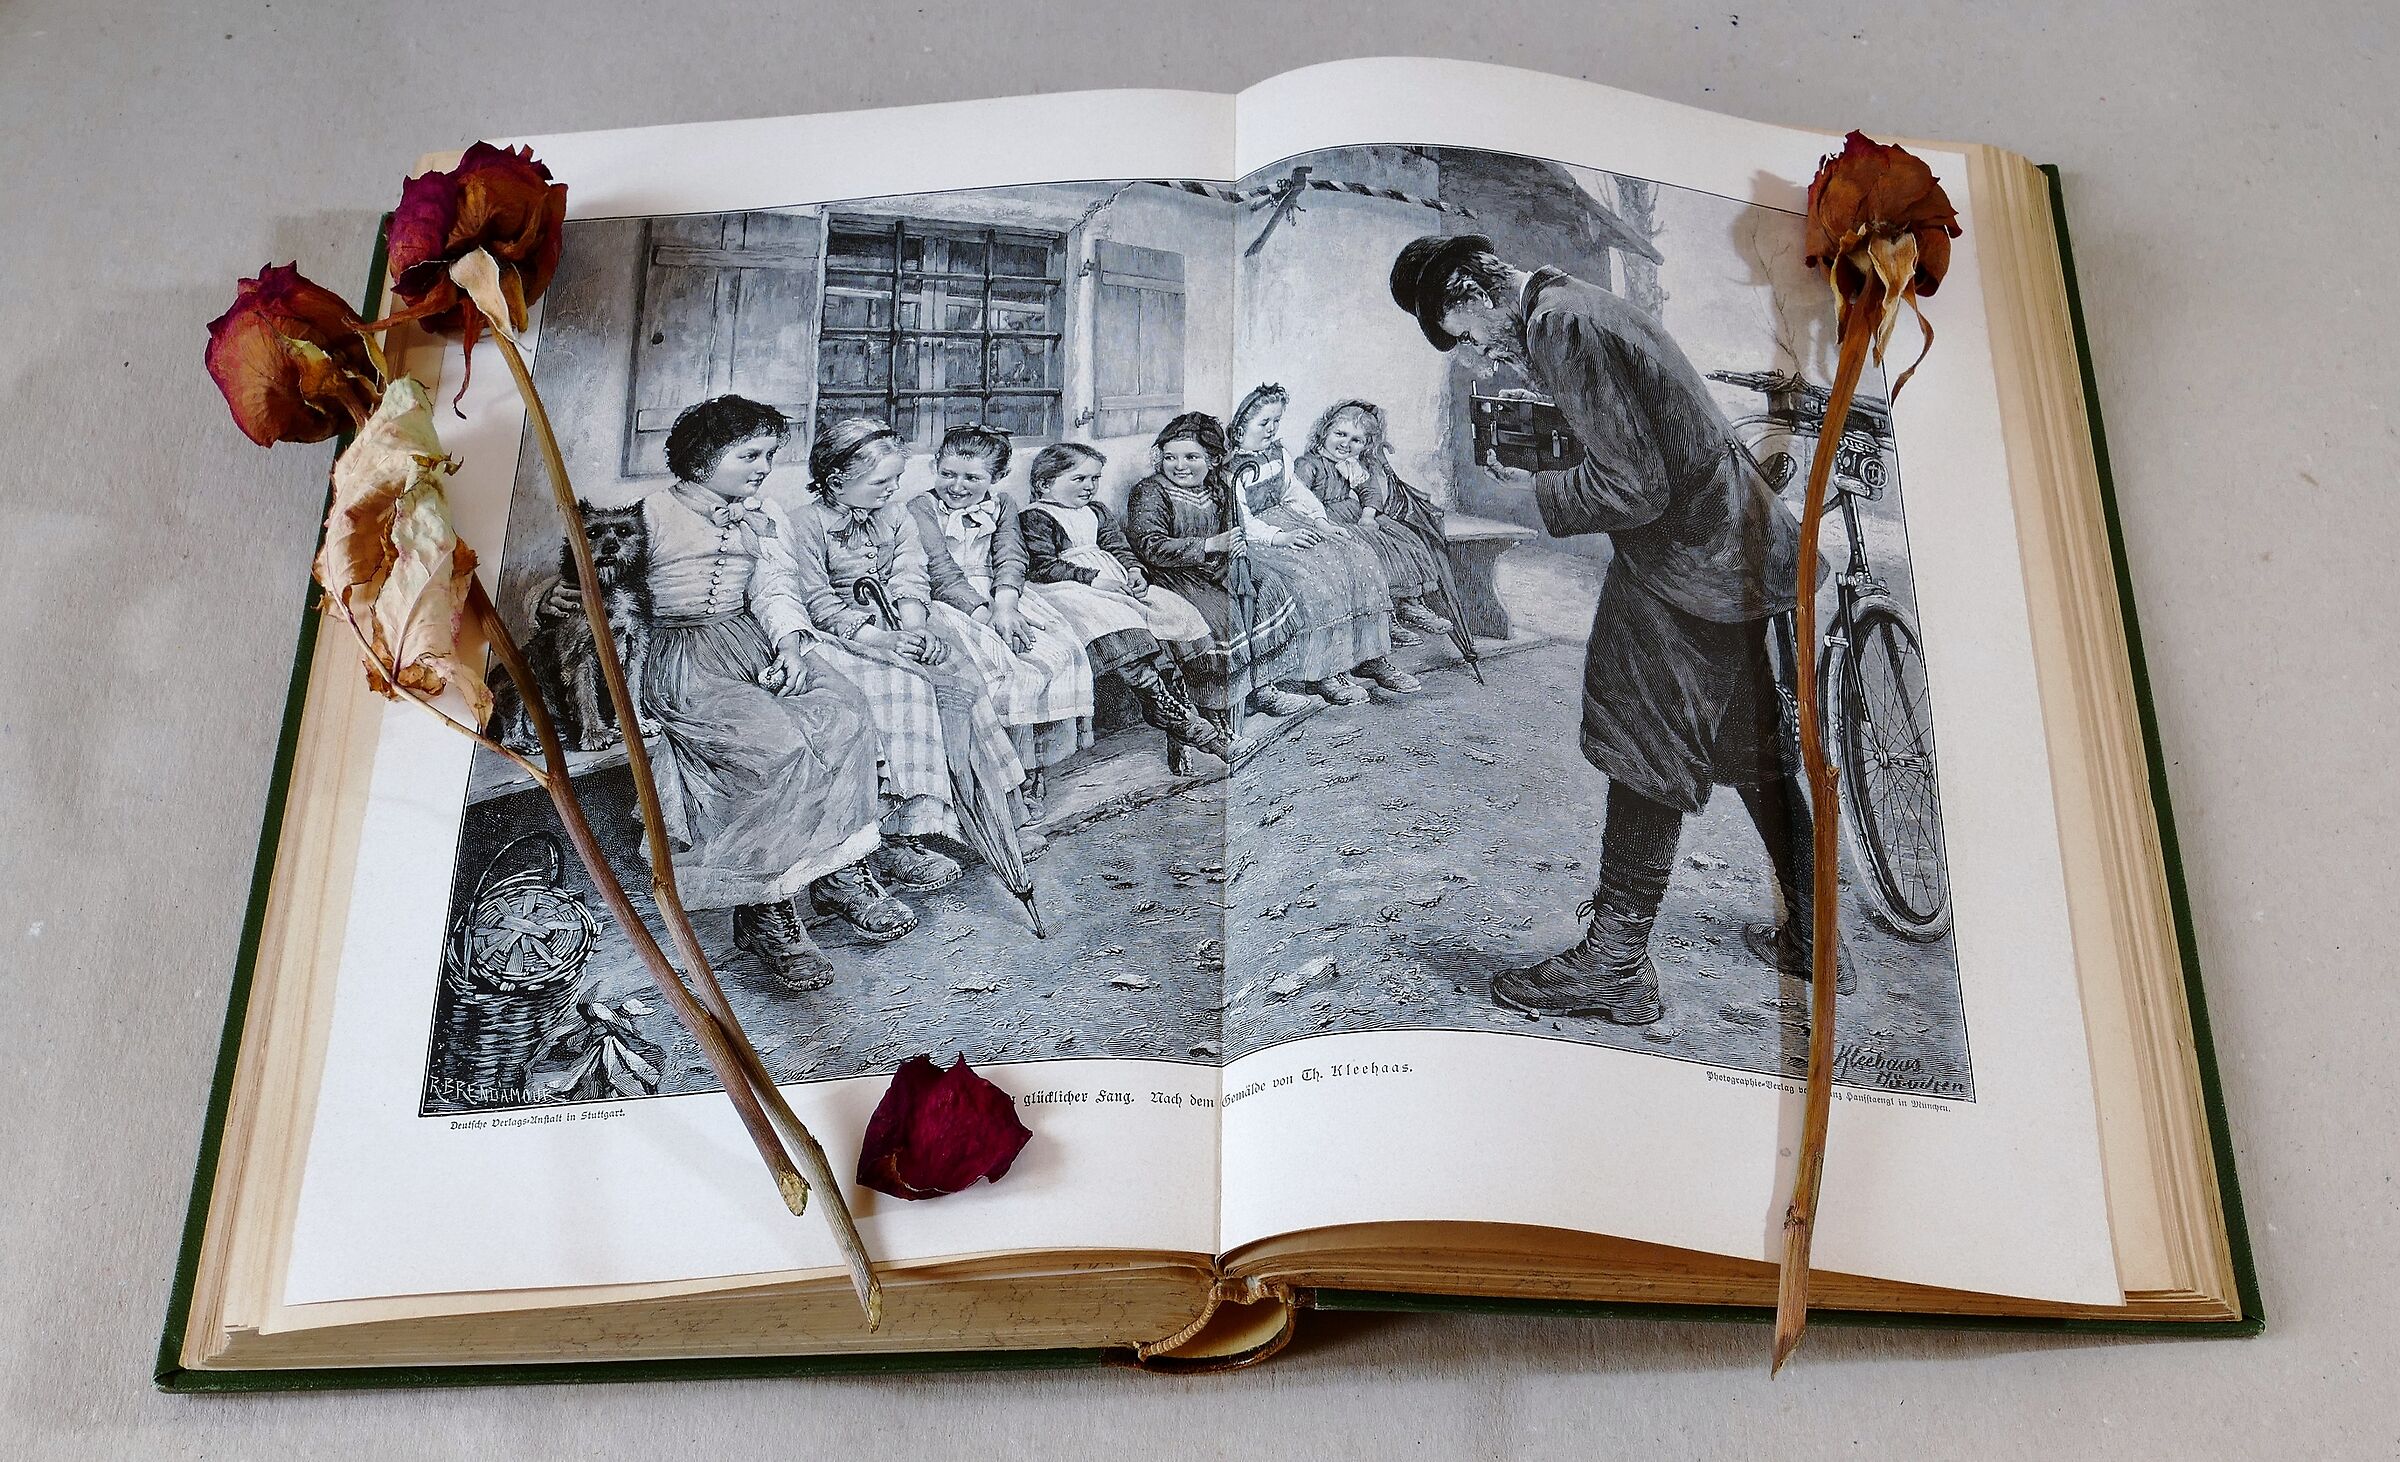 Old book - old roses - old photographer (I)....